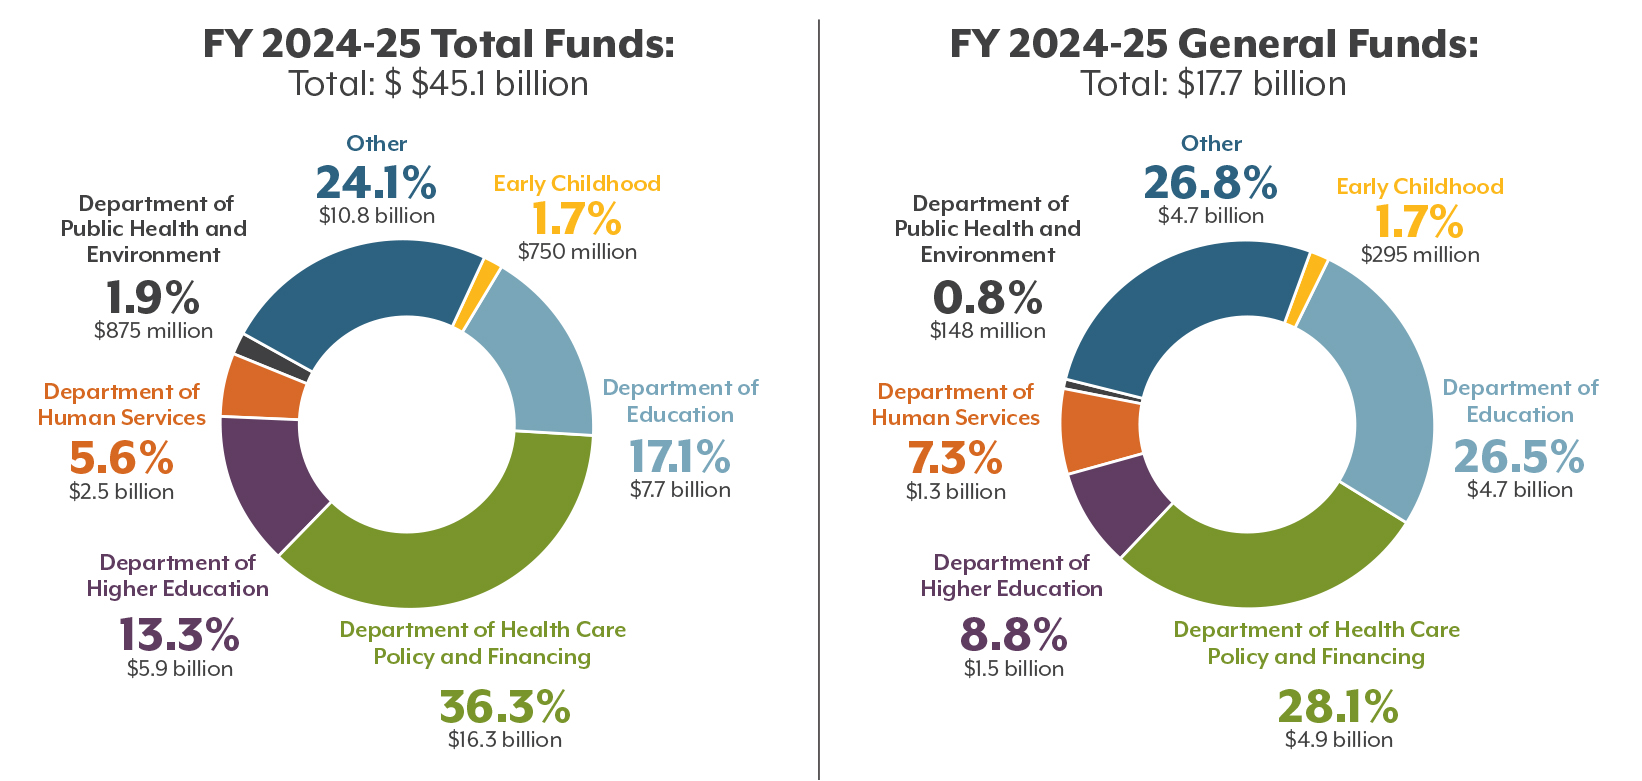 FY 2024-25 Total and General Funds donut graphic 